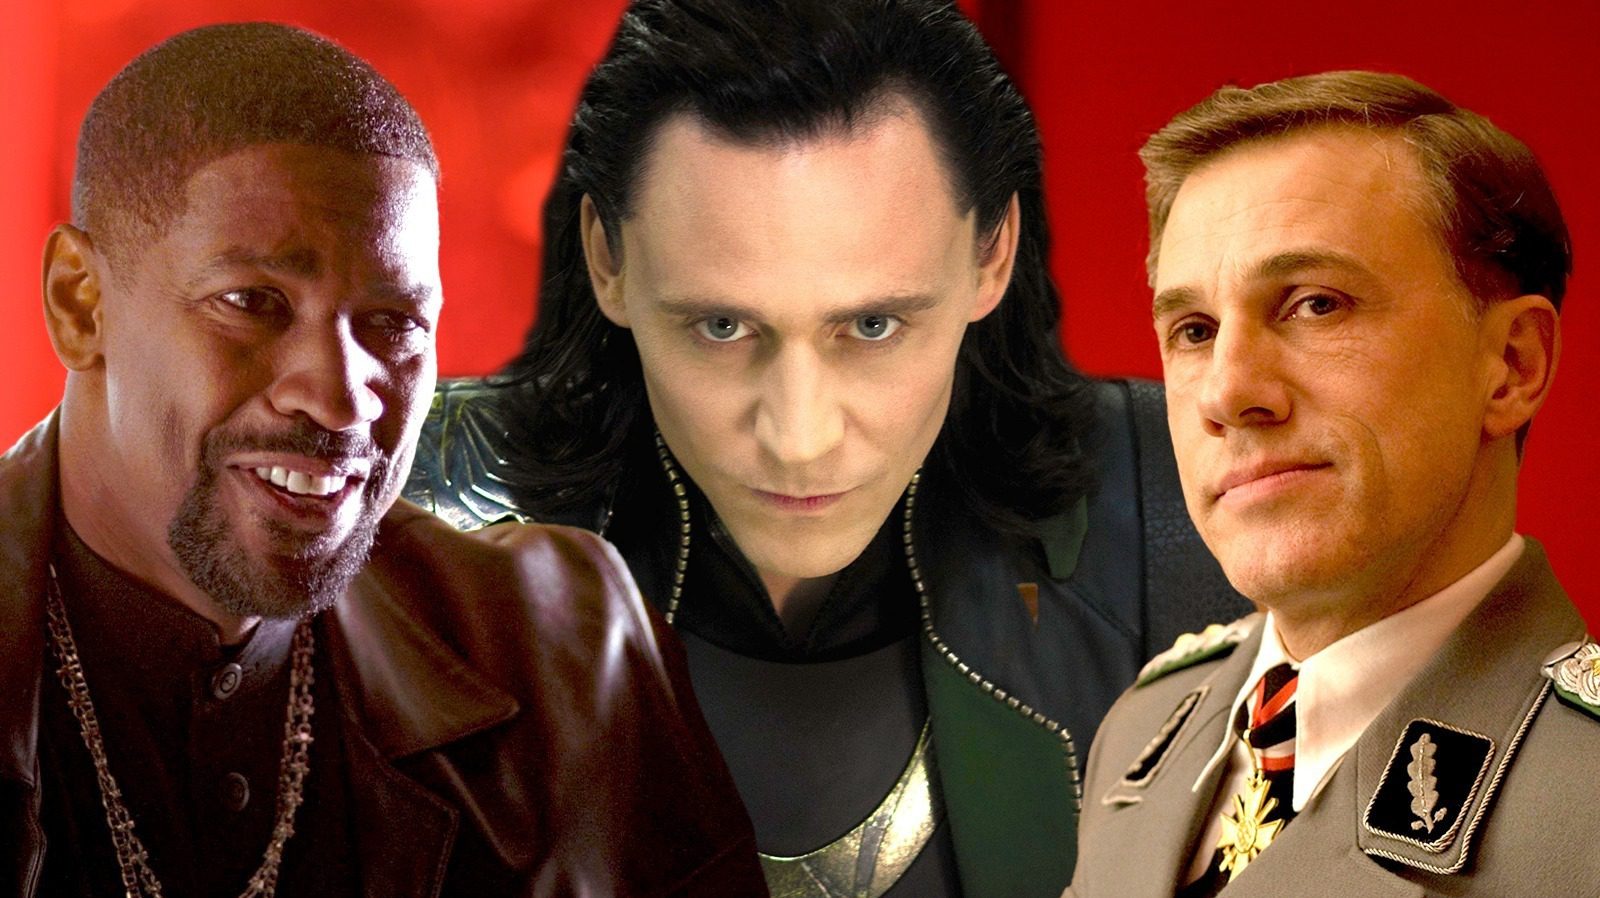 The Most Charismatic Villains In Film History